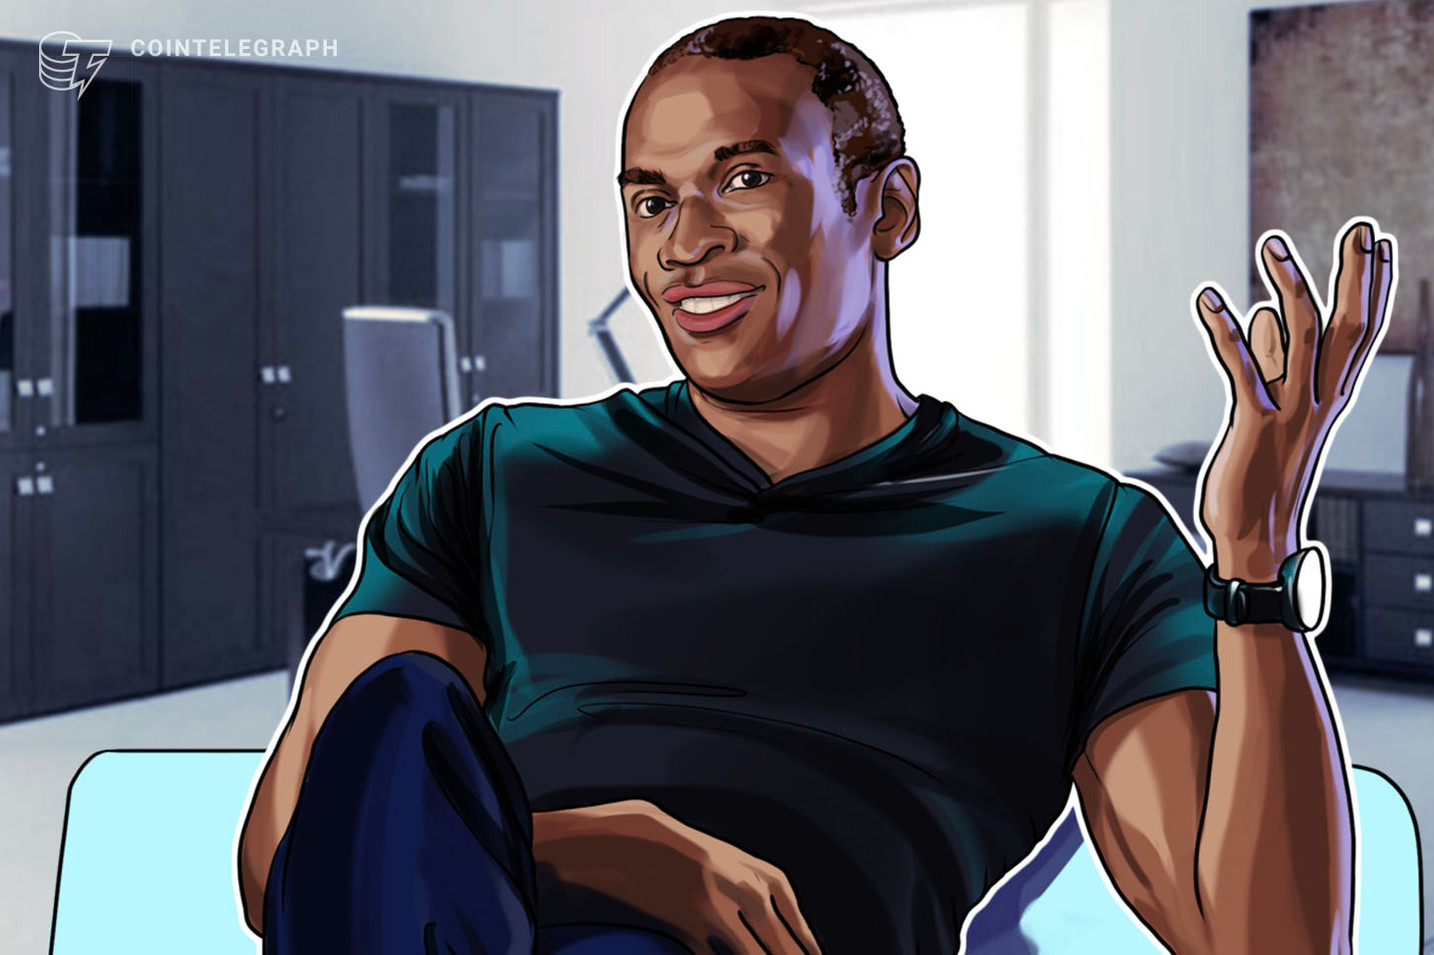 BitMEX's Arthur Hayes returns with calls for a boycott of legacy finance